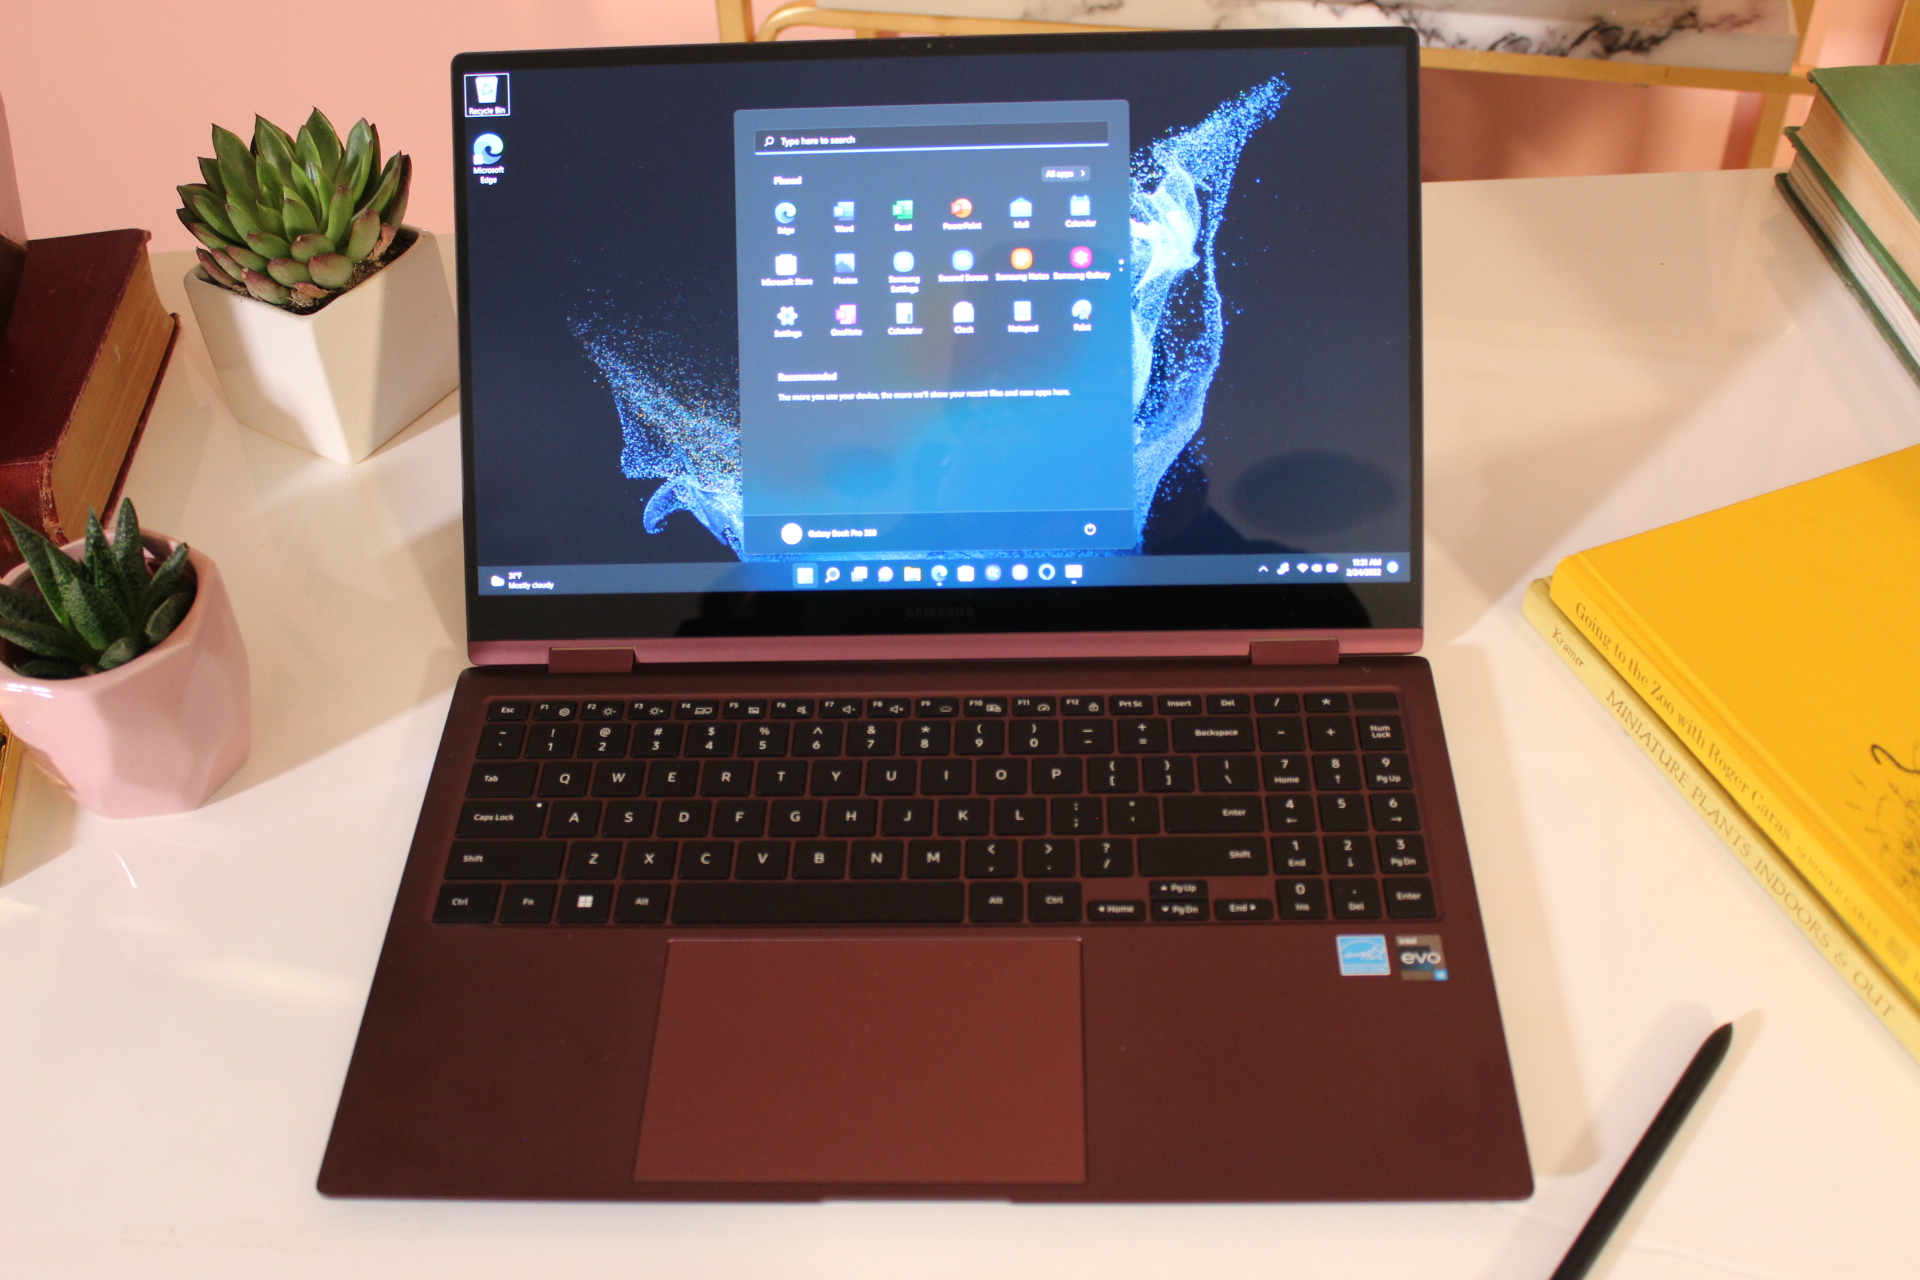 Samsung Galaxy Book 2 Pro  hands on review: A sturdy sequel